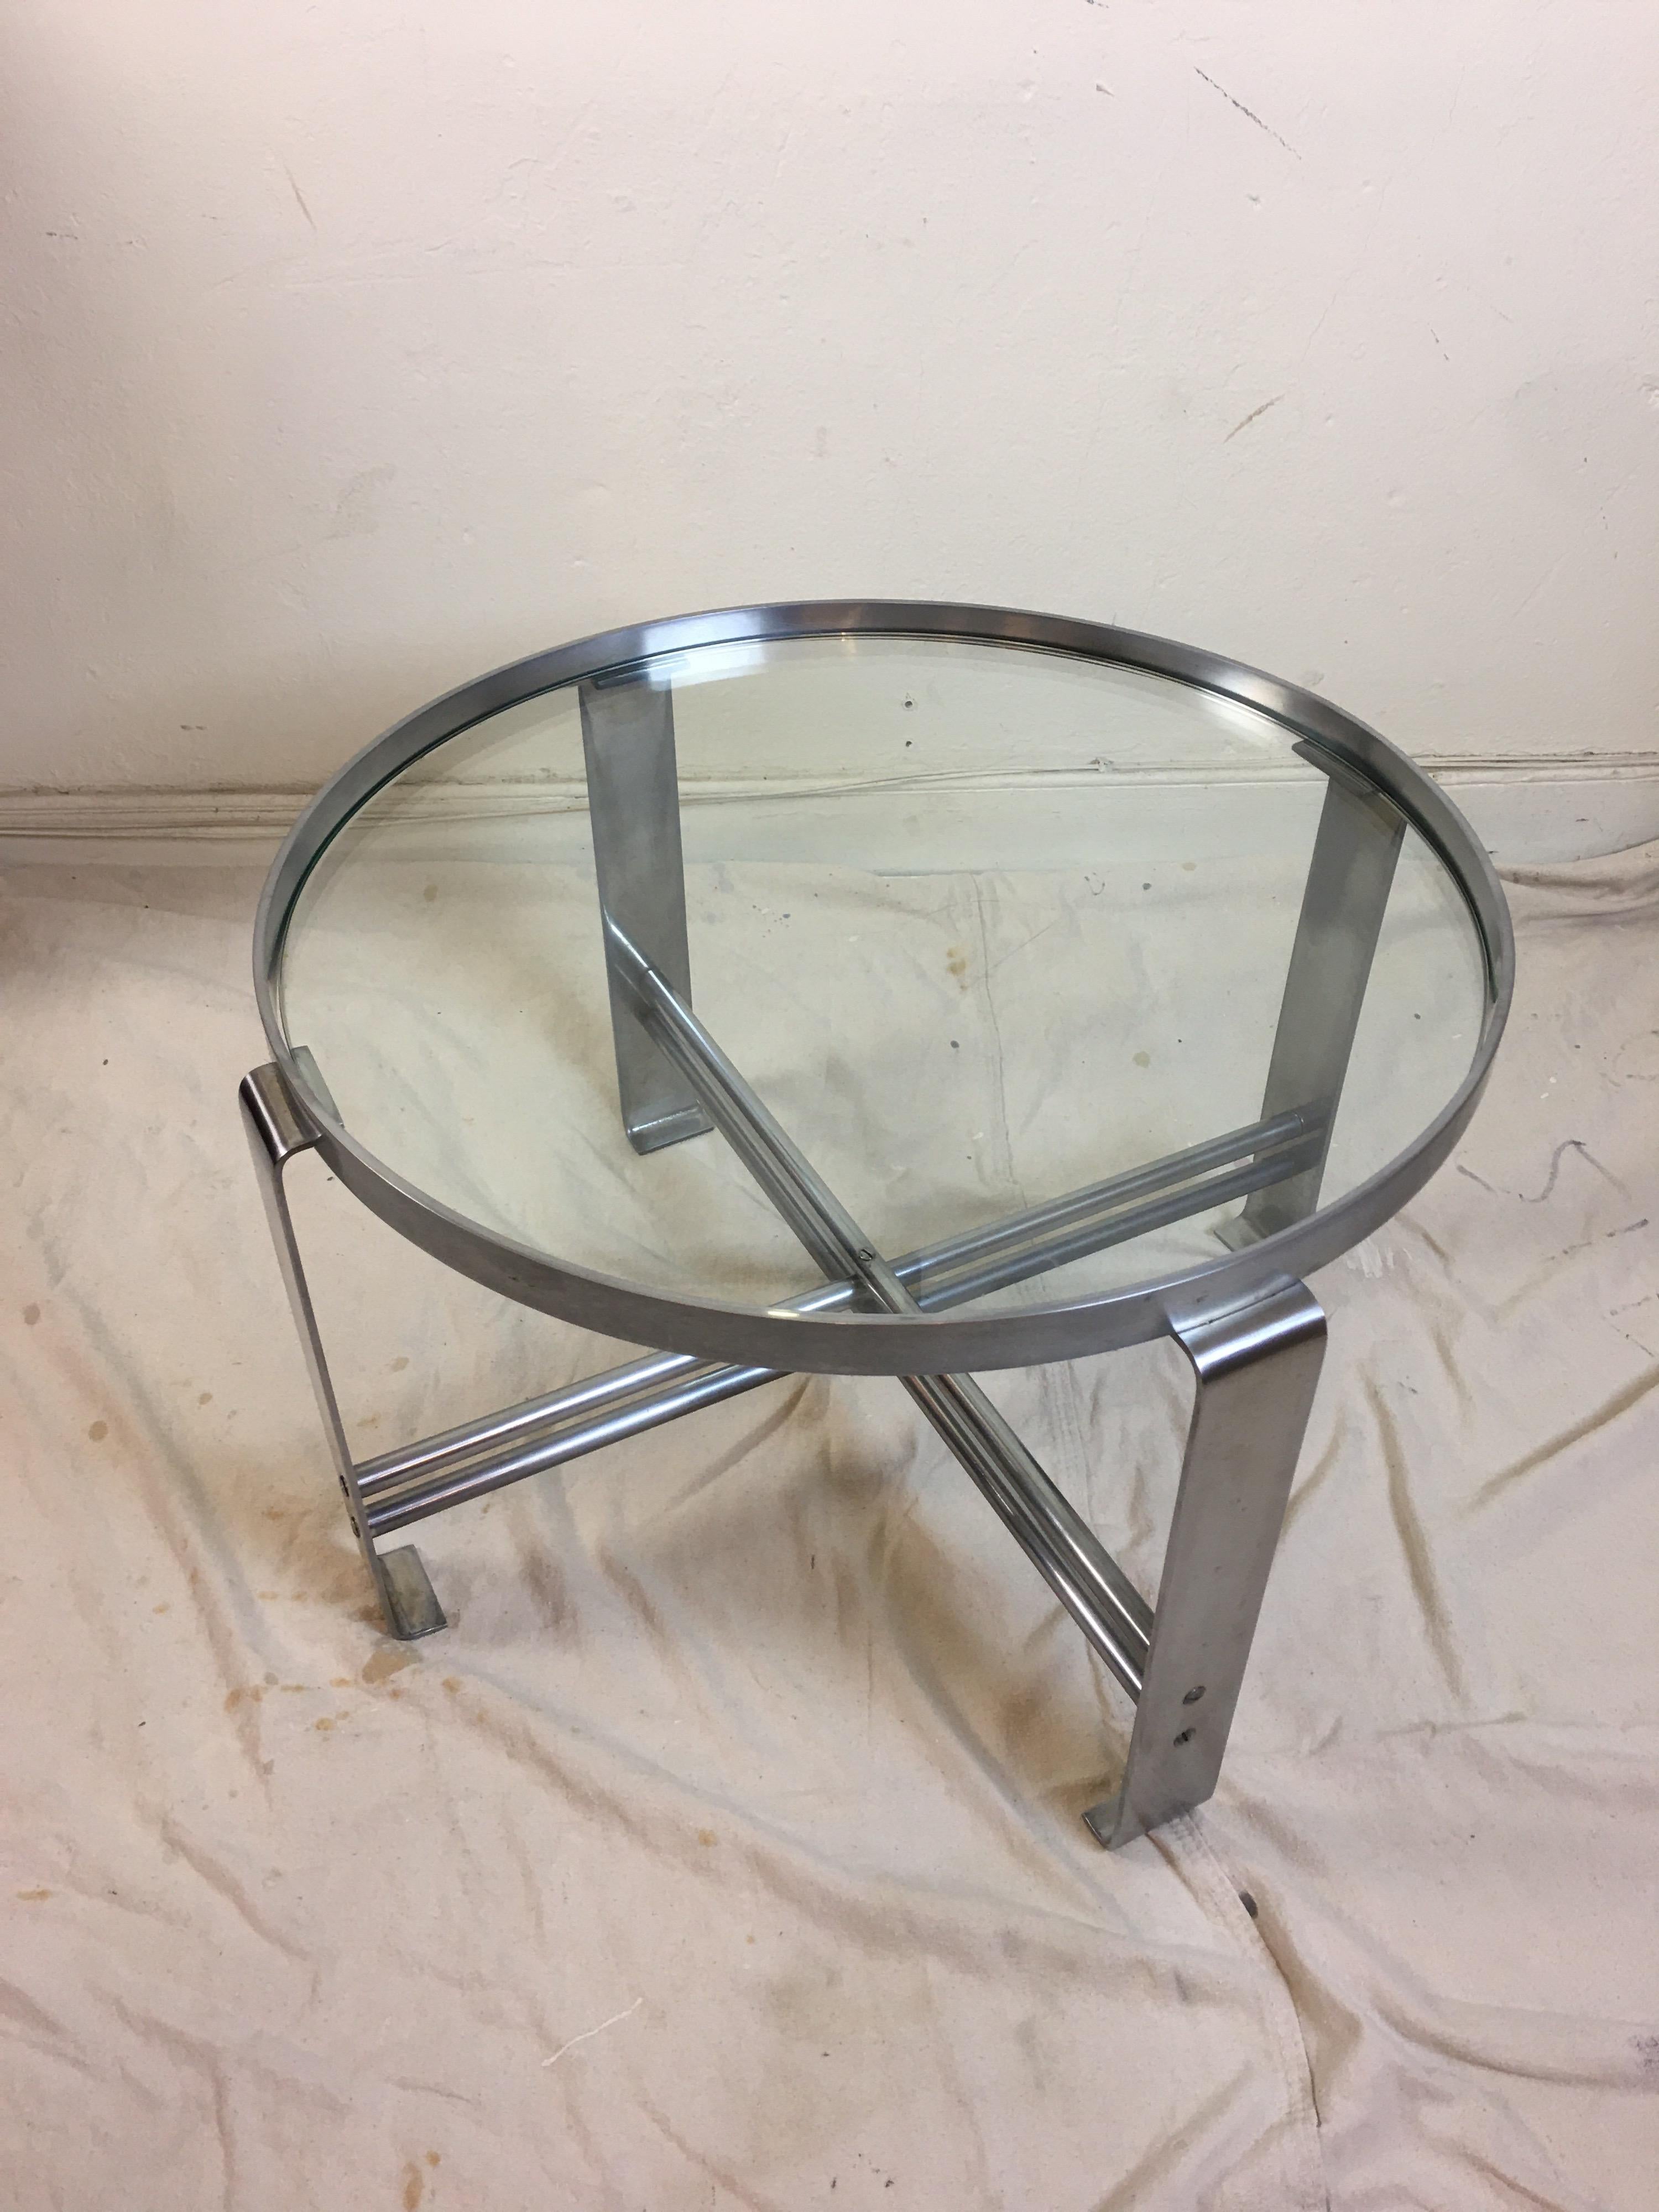 Wolfgang Hoffmann round glass and chrome coffee table for Howell Furniture. Probably his most iconic design from the mid-1930s. Satin chrome finish appears to be original, some small flaws as shown in photos.